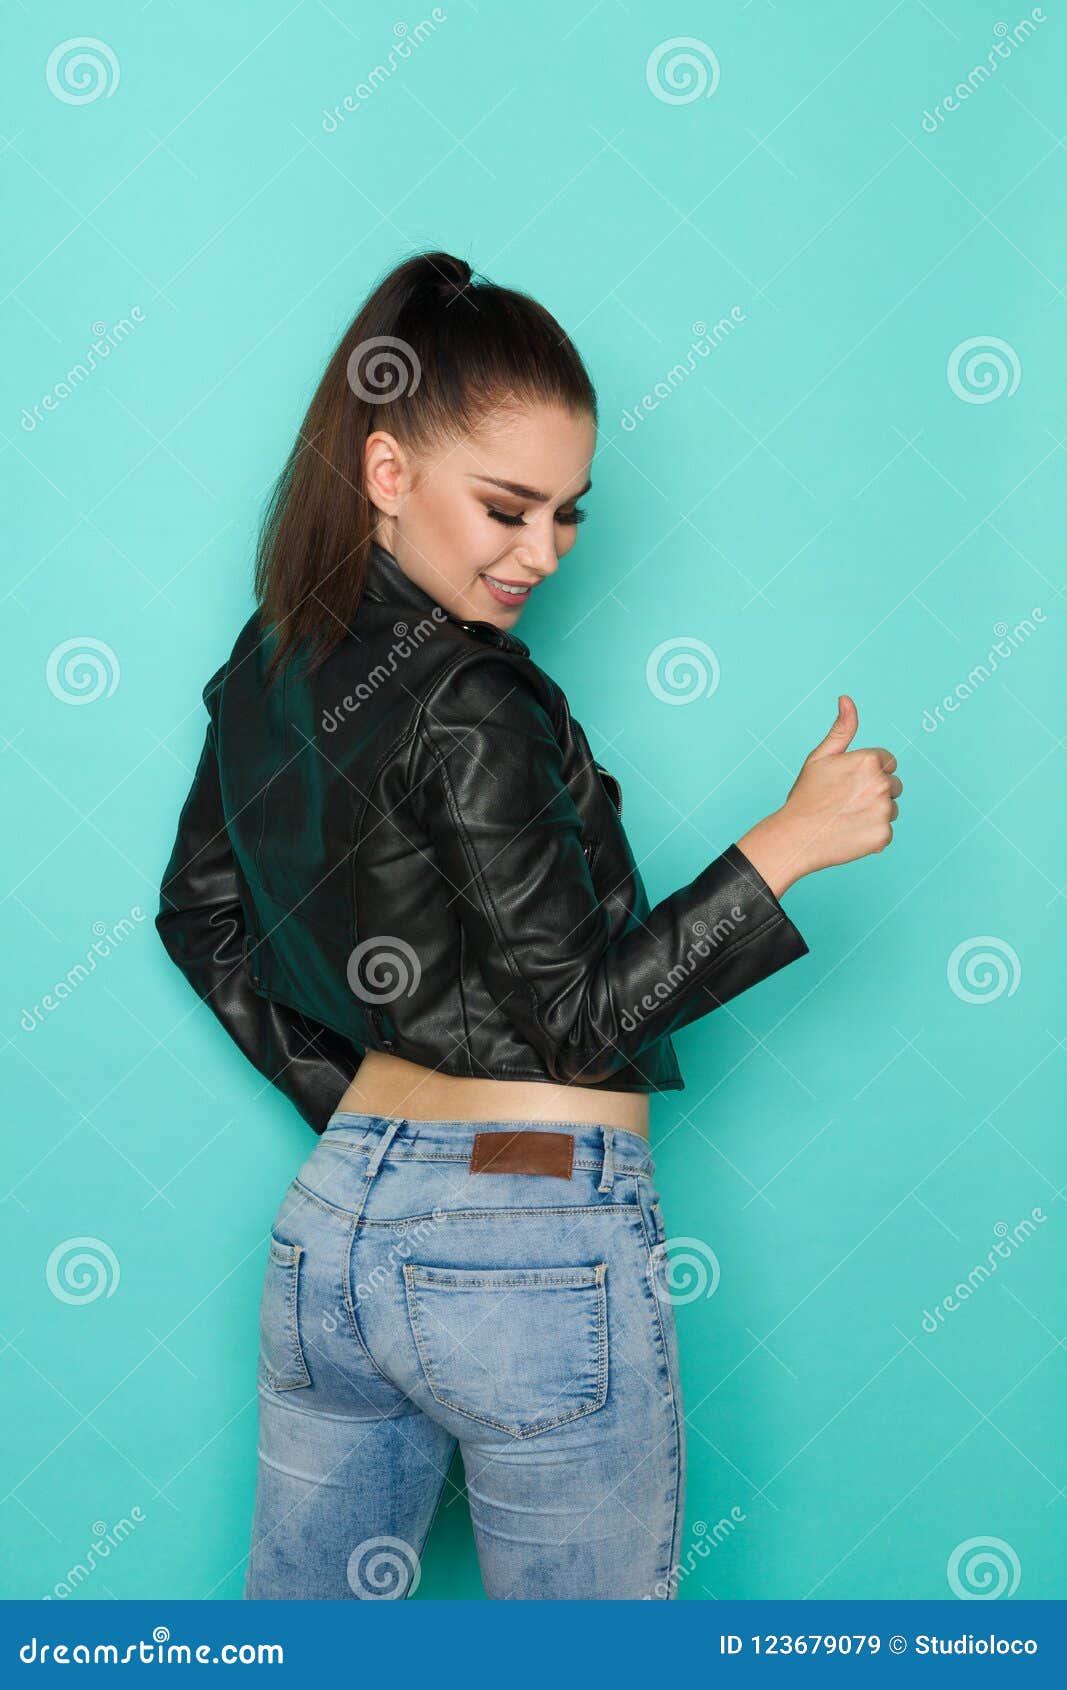 Smiling Woman in Leather Jacket is Looking Over Shoulder and Showing ...